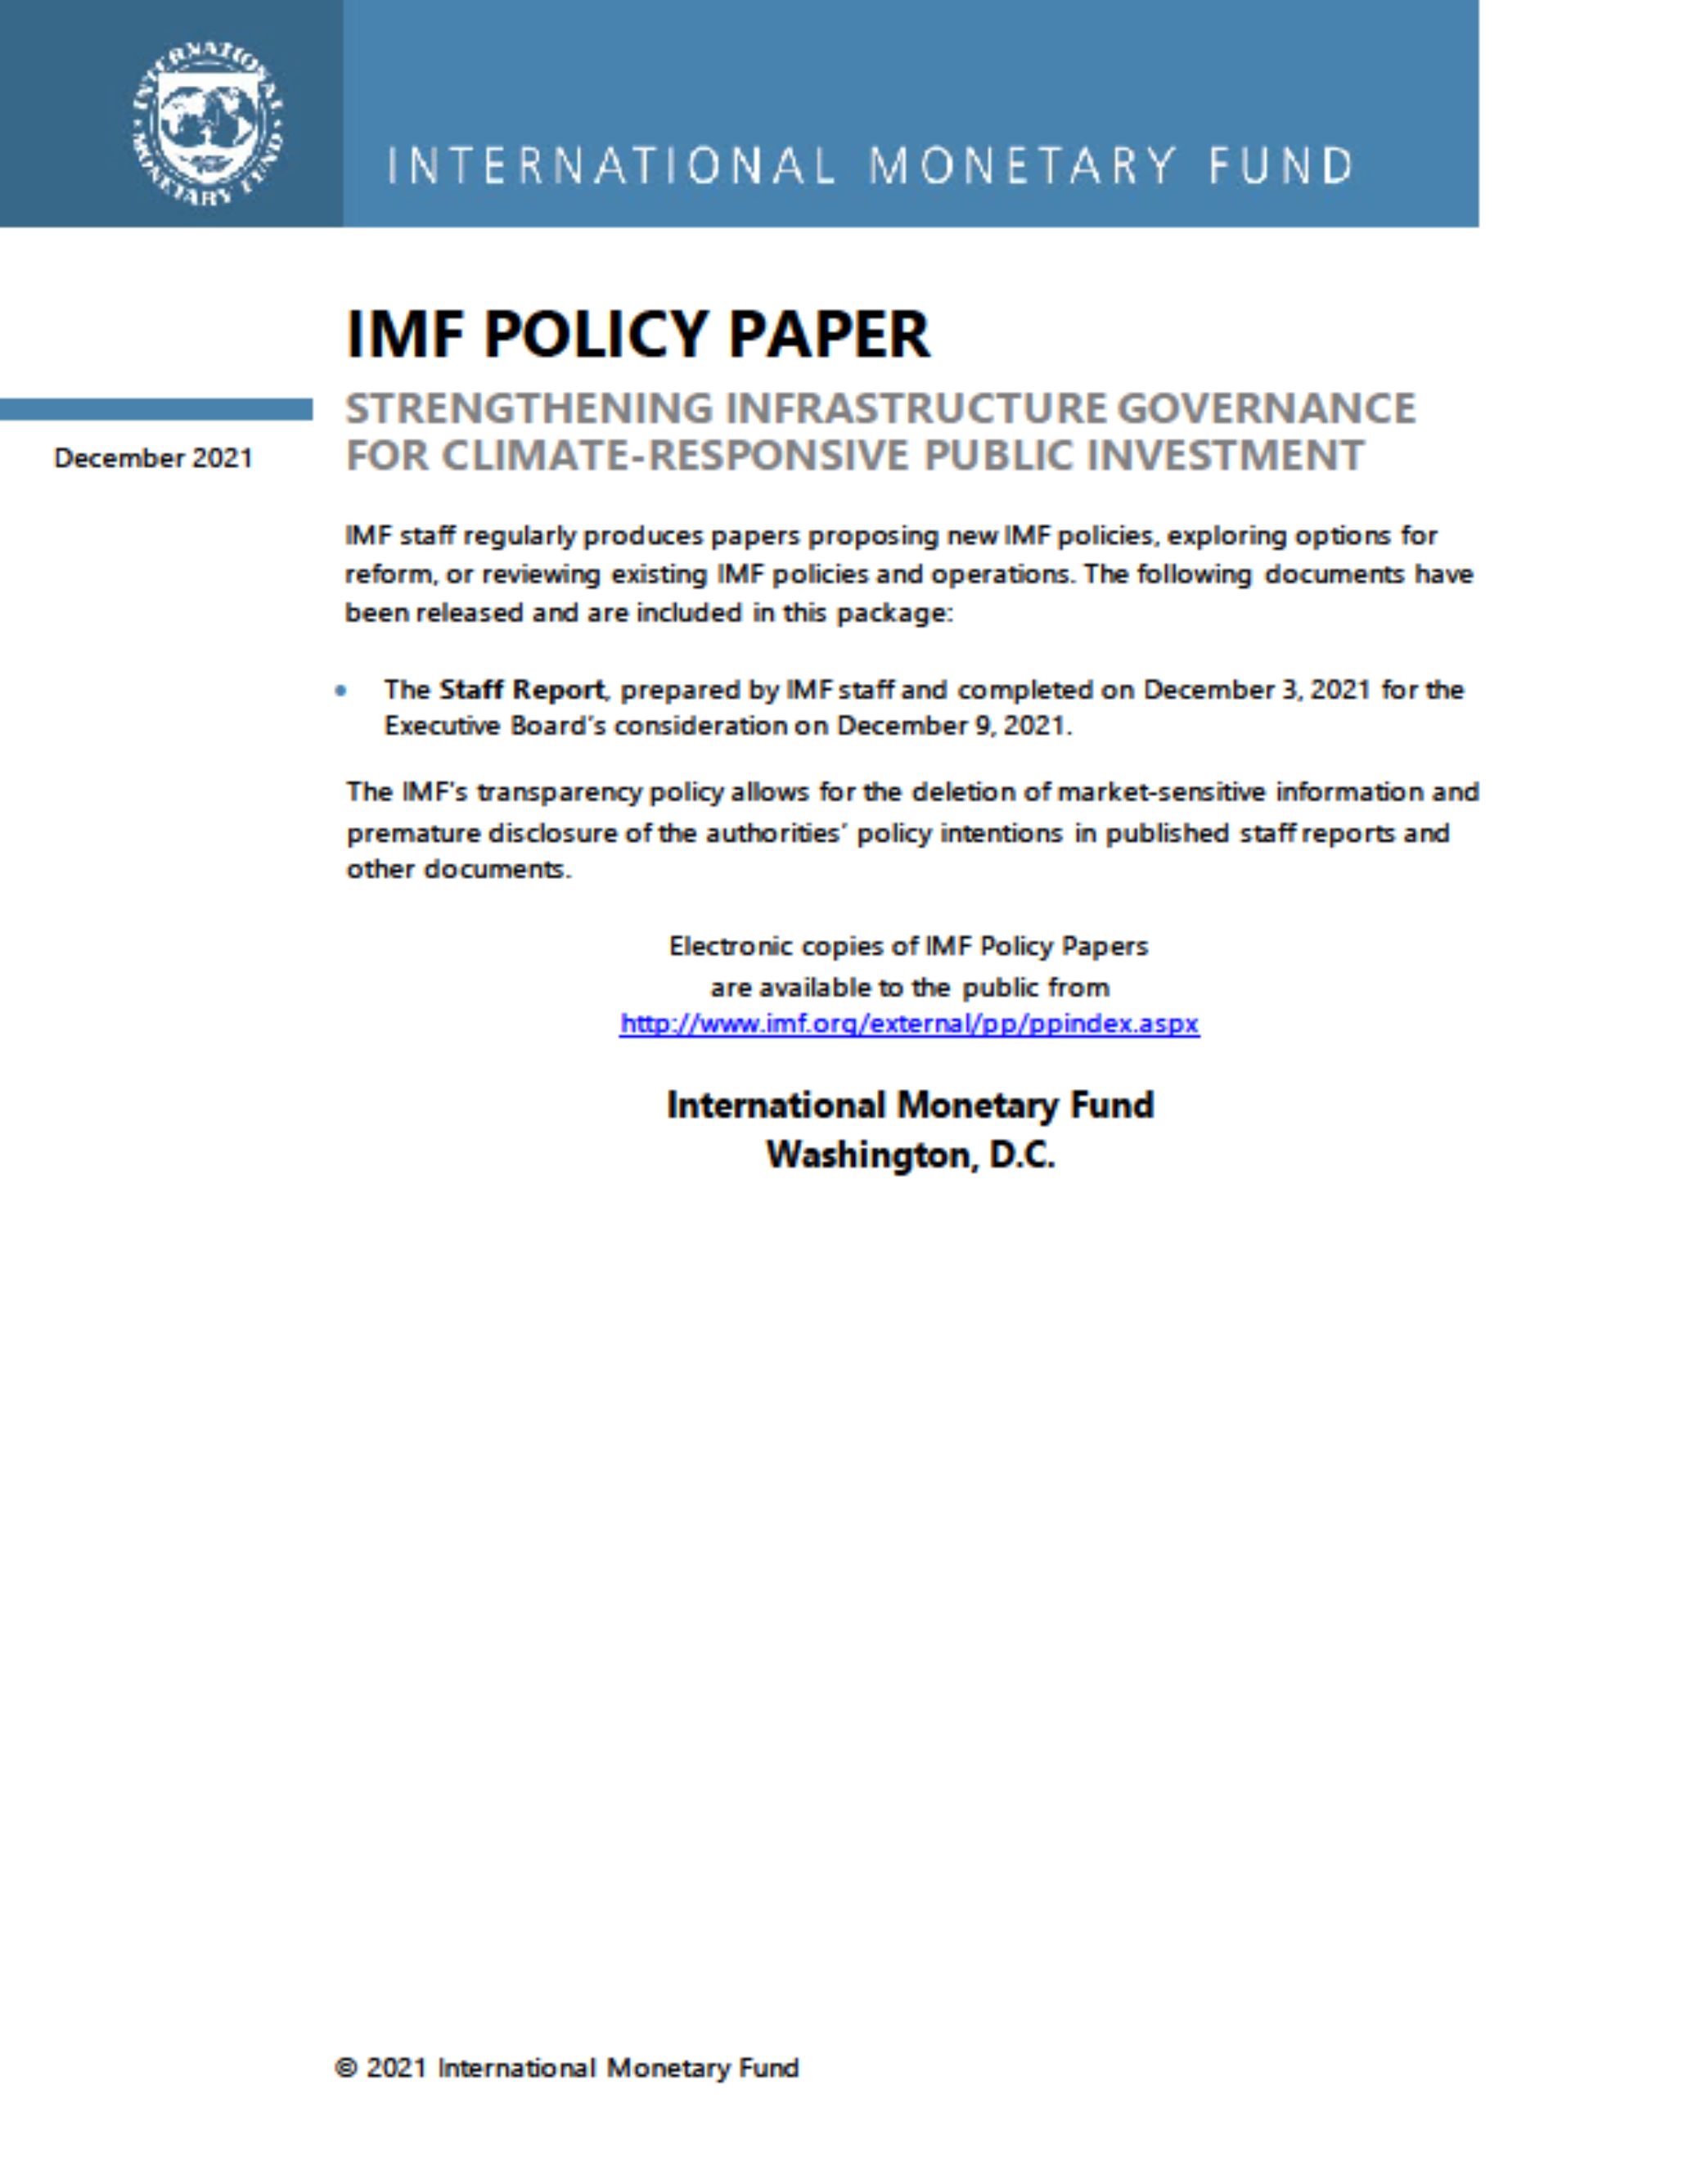 Strengthening Infrastructure Governance for Climate-Responsive Public Investment (Climate PIMA)